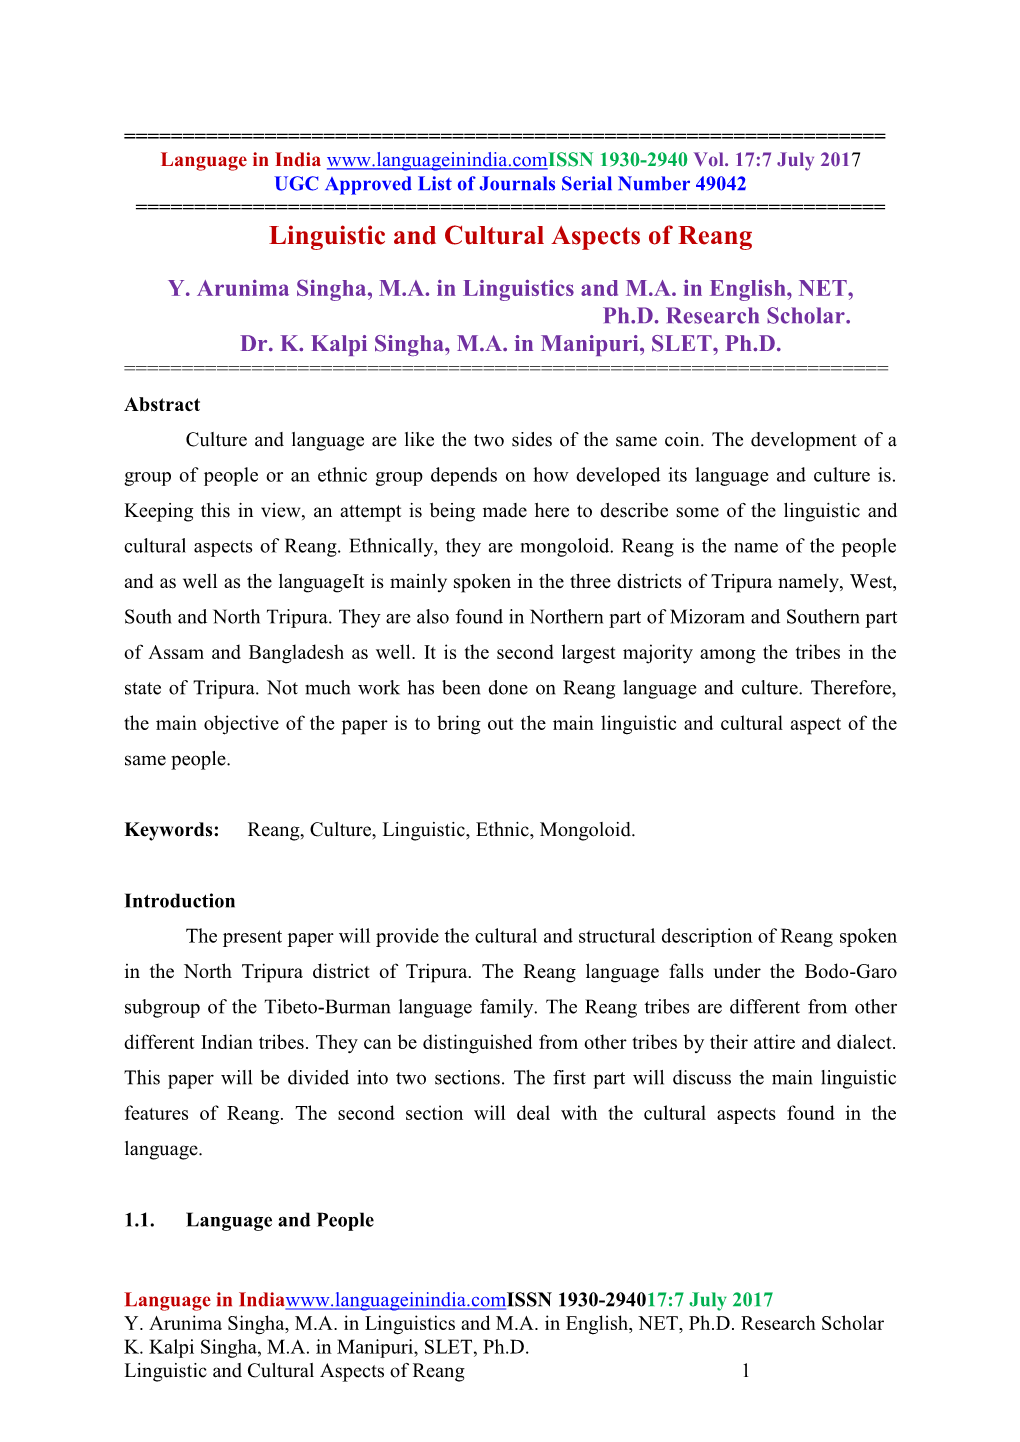 Linguistic and Cultural Aspects of Reang